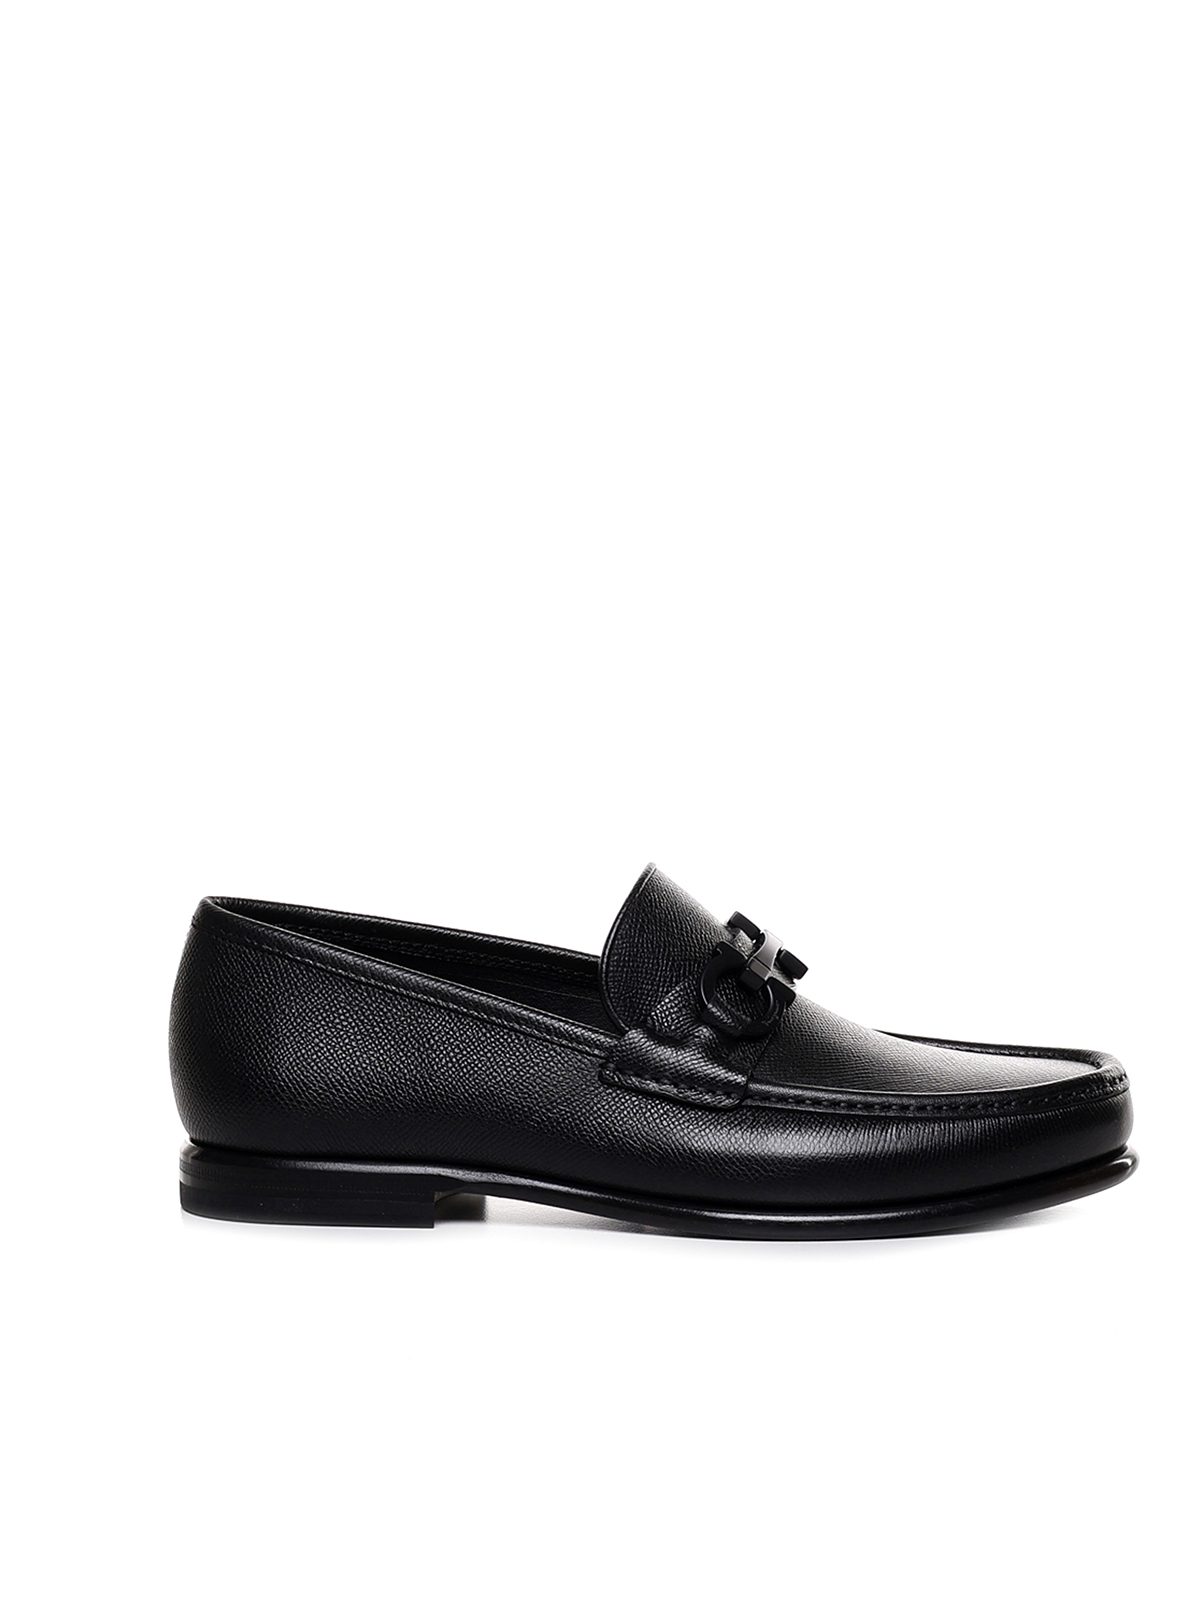 Ferragamo Calf Leather Loafers With Gancini Buckle In Black